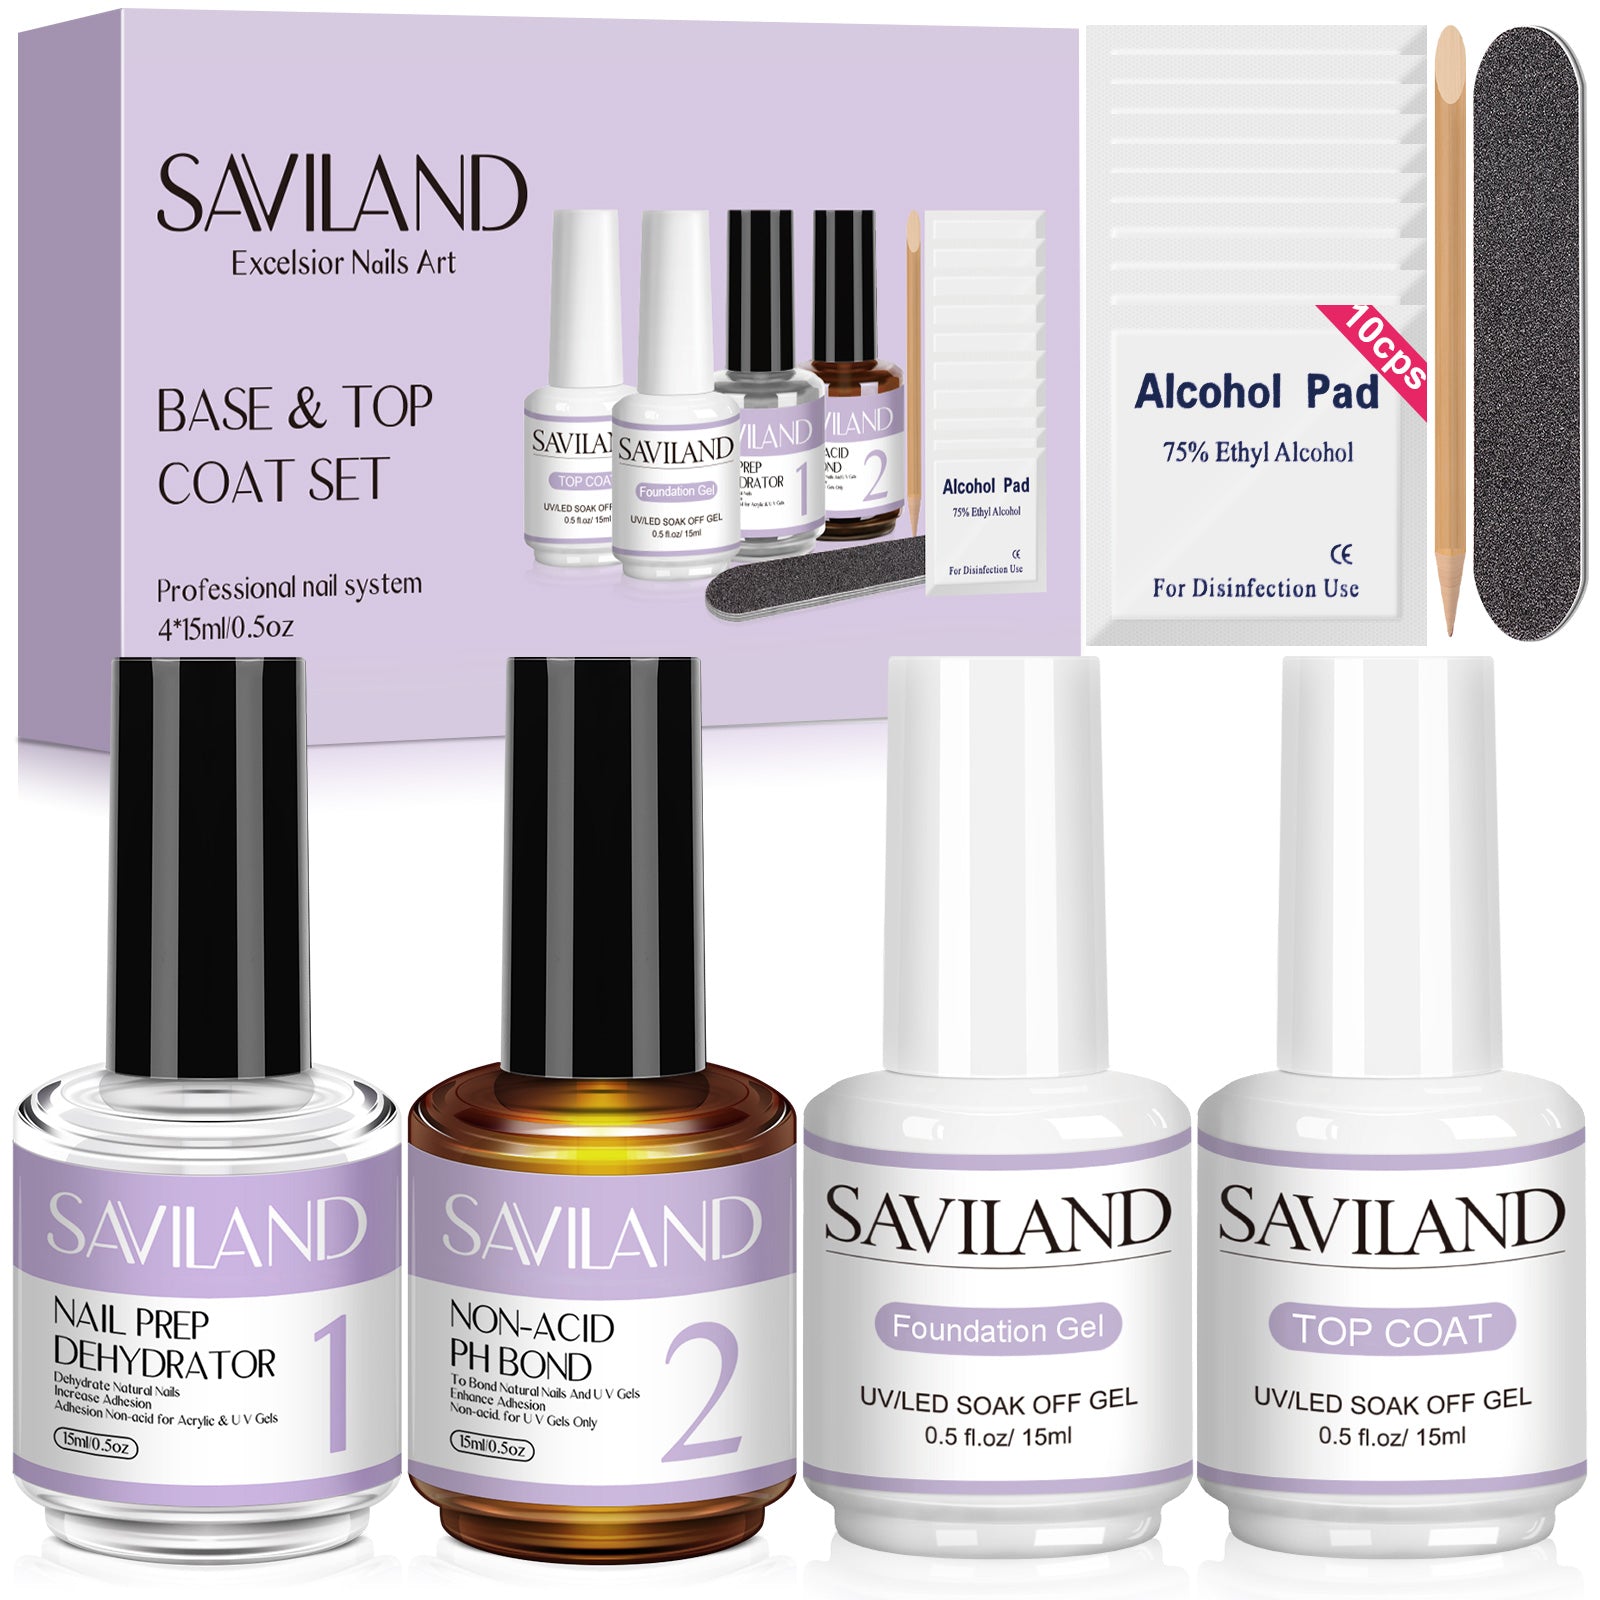 Dehydrator and Primer with Base & Top Coat – Saviland